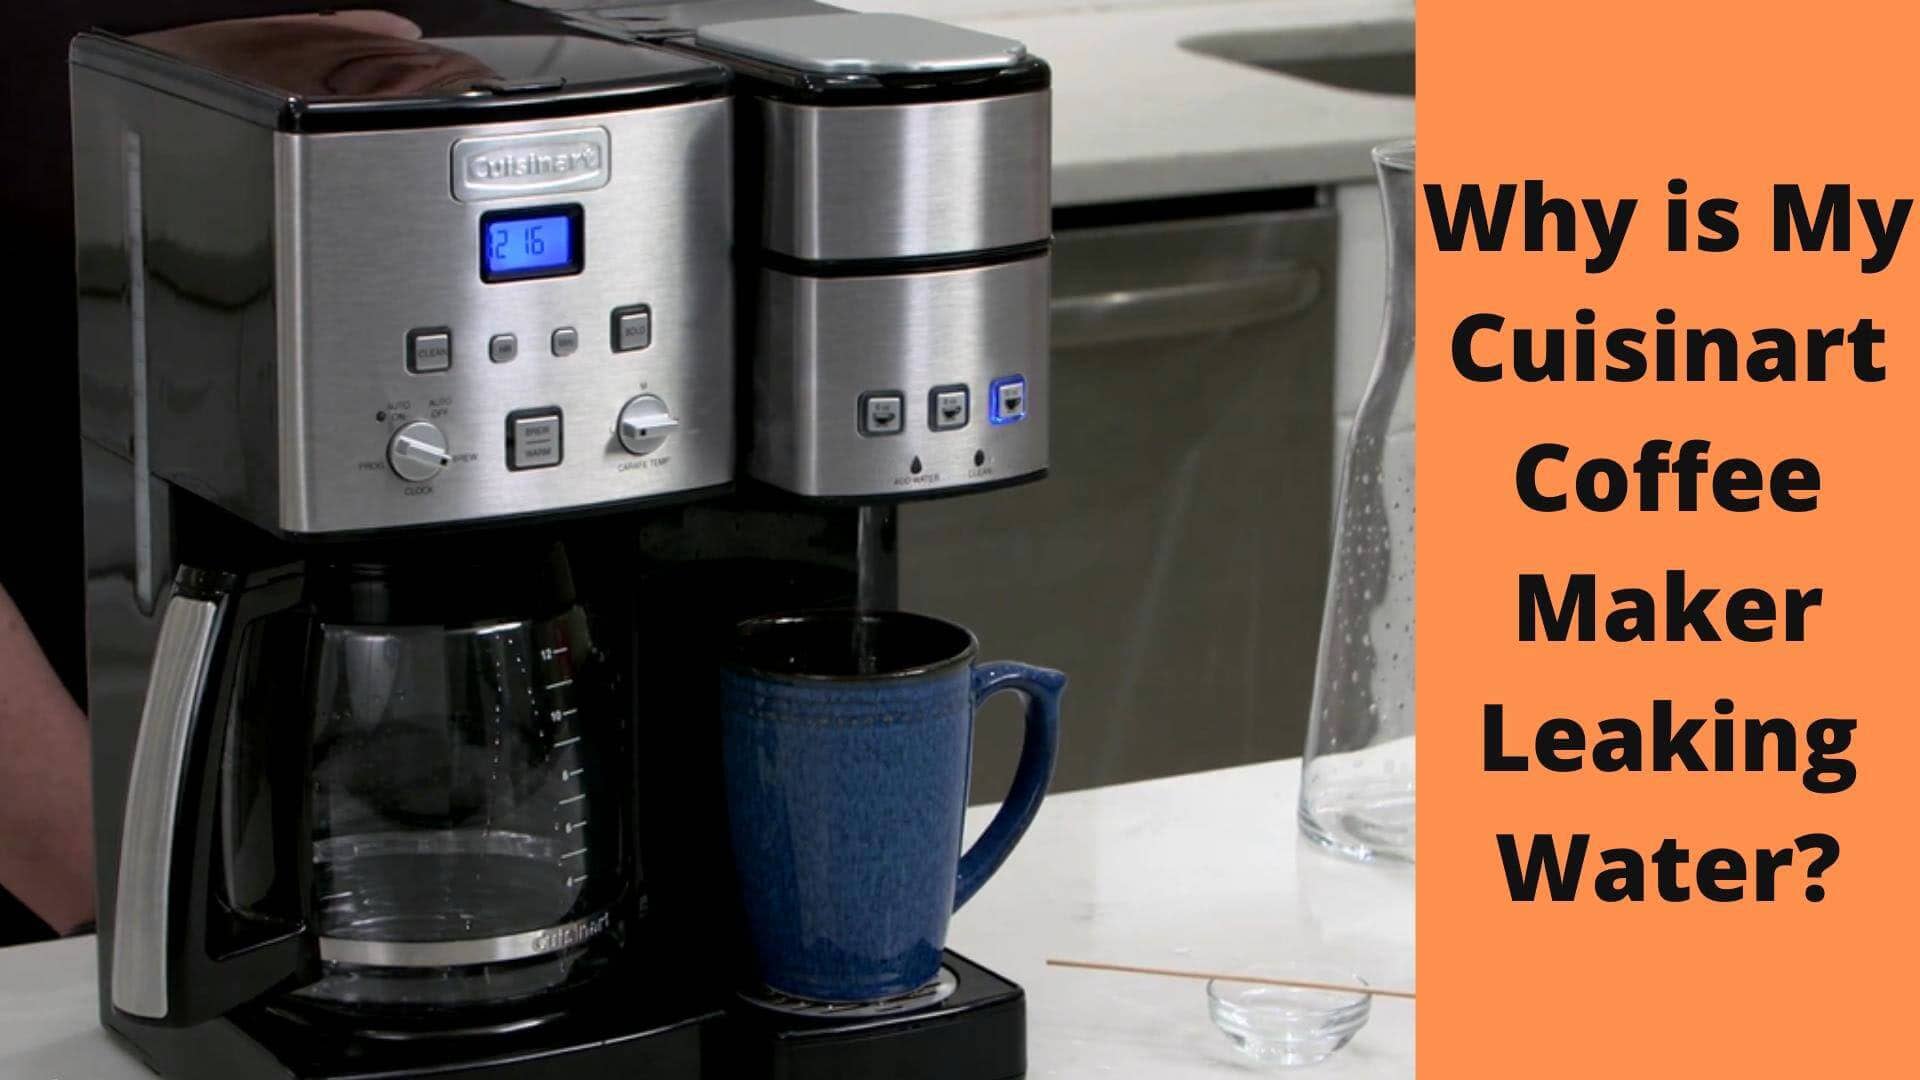 Why is My Cuisinart Coffee Maker Leaking Water?